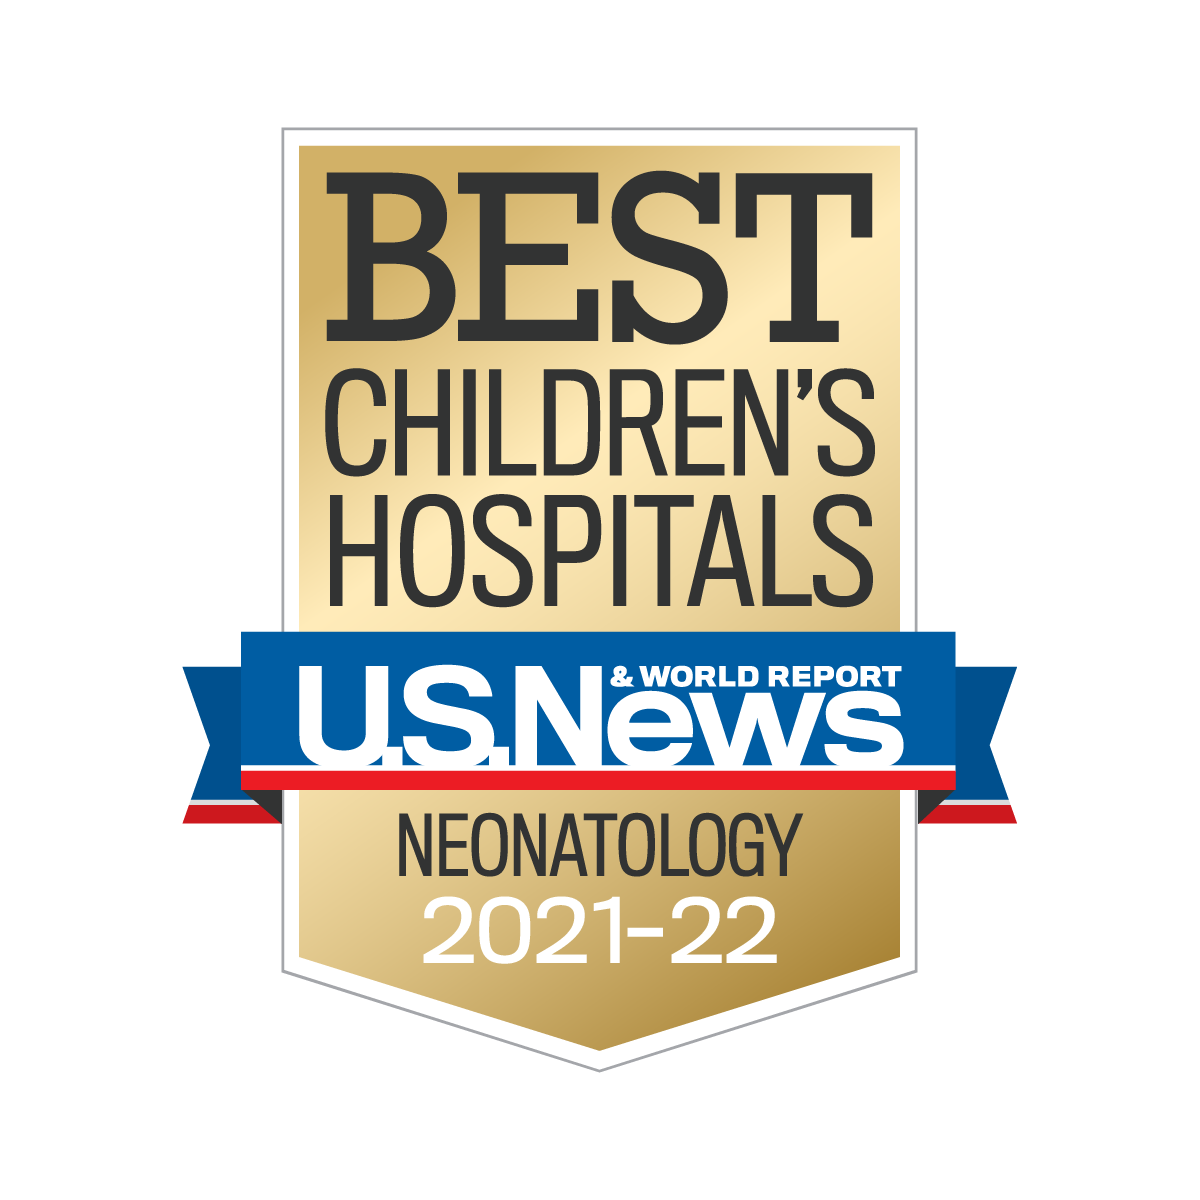 AdventHealth has been designated a U.S. News & World Report High Performing Hospital for neonatology for 2021-2022.